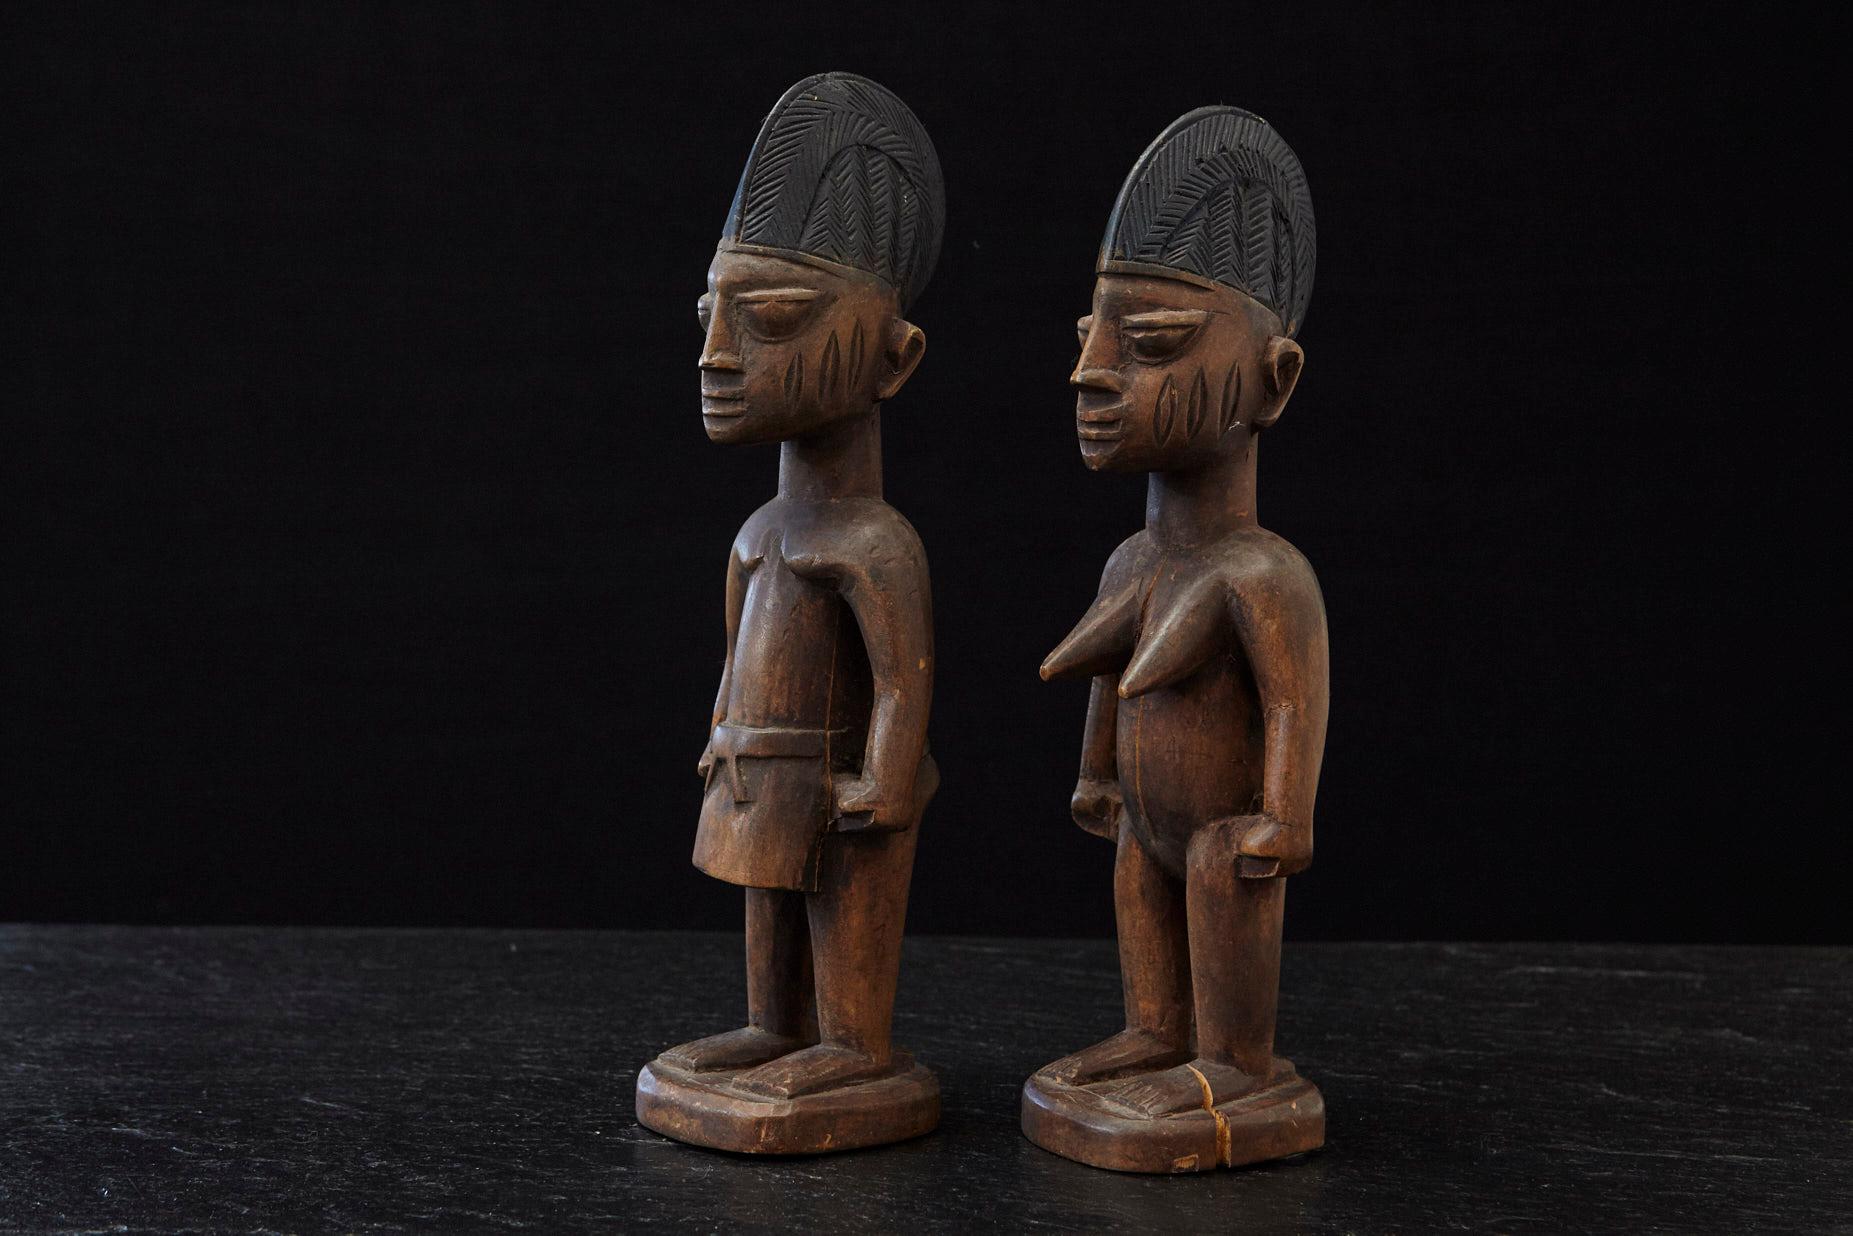 Yoruba people have one of the highest incidents of twin births in the world. As a result, twin children are regarded as extraordinary, divine beings protected by Sango, the deity of thunder. They are believed to be capable of bestowing immense